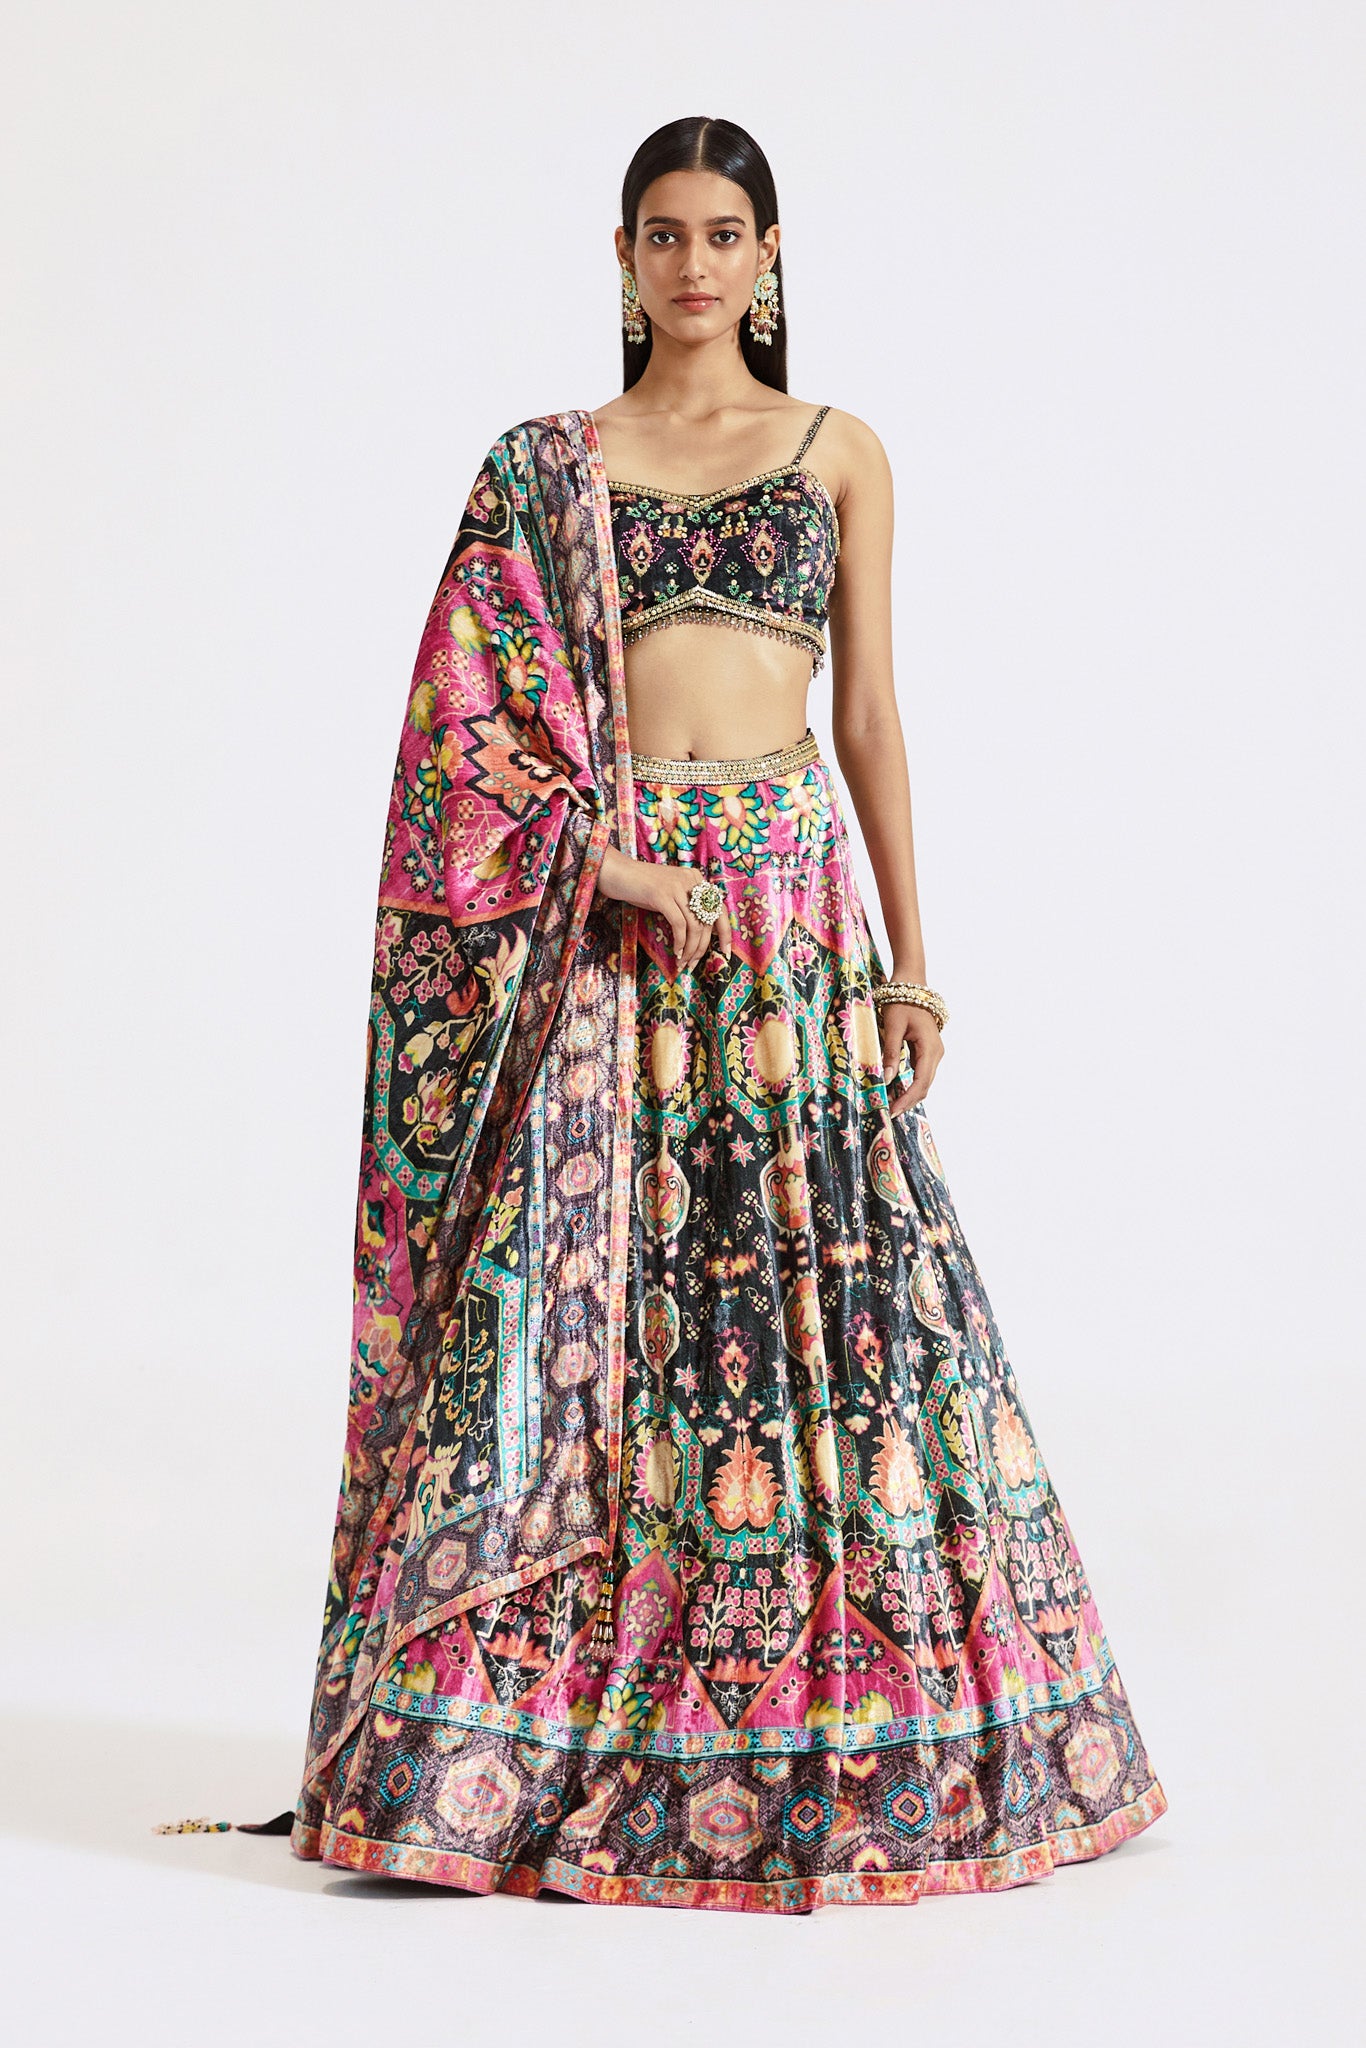 Buy multicolor embroidered velvet lehenga online in USA with dupatta. Shop the best and latest designs in embroidered sarees, designer sarees, Anarkali suit, lehengas, sharara suits for weddings and special occasions from Pure Elegance Indian fashion store in USA.-full view